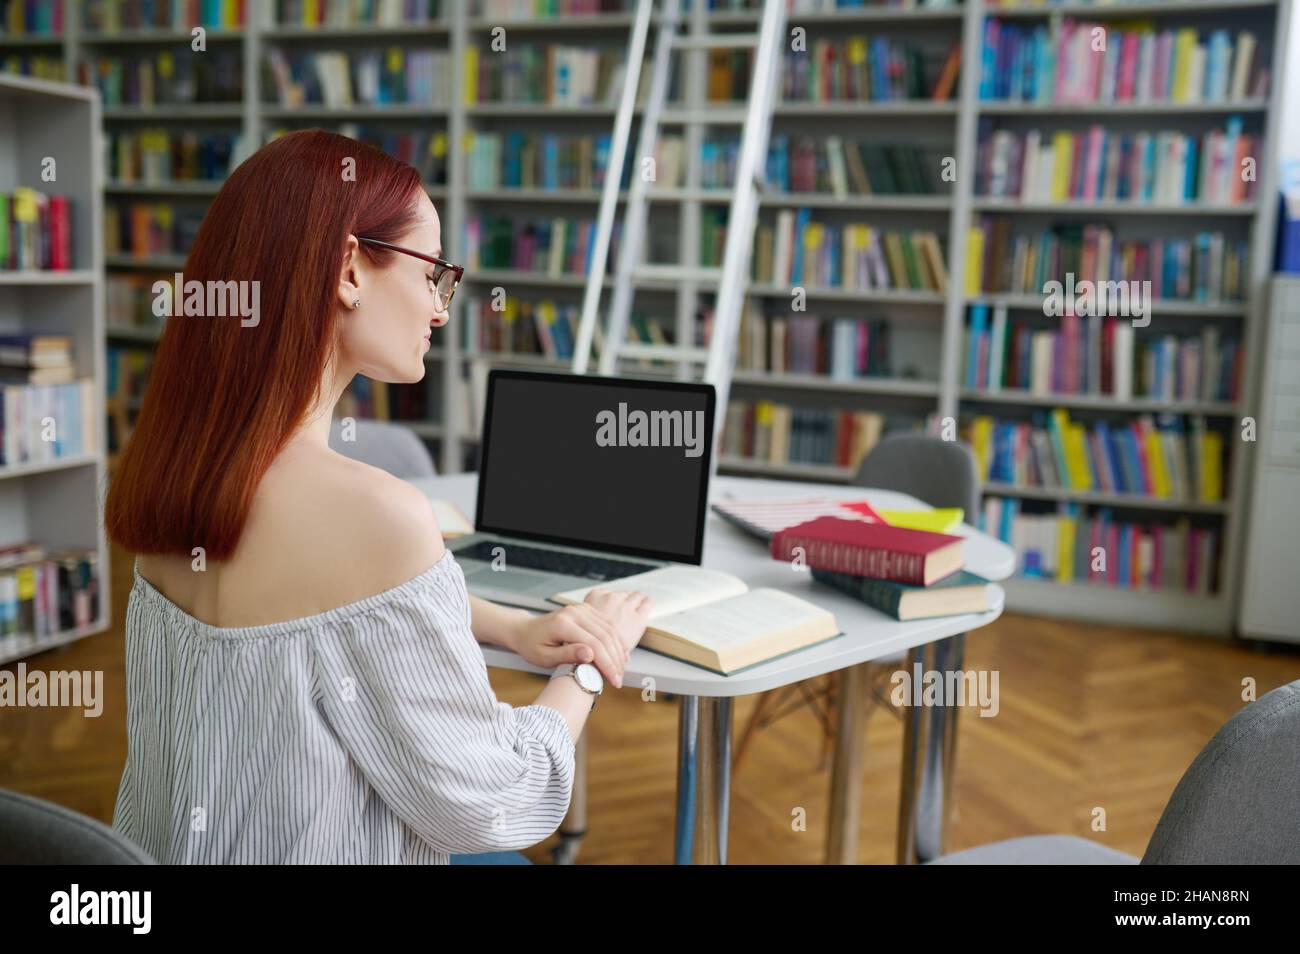 Back view of woman reading book in library Stock Photo